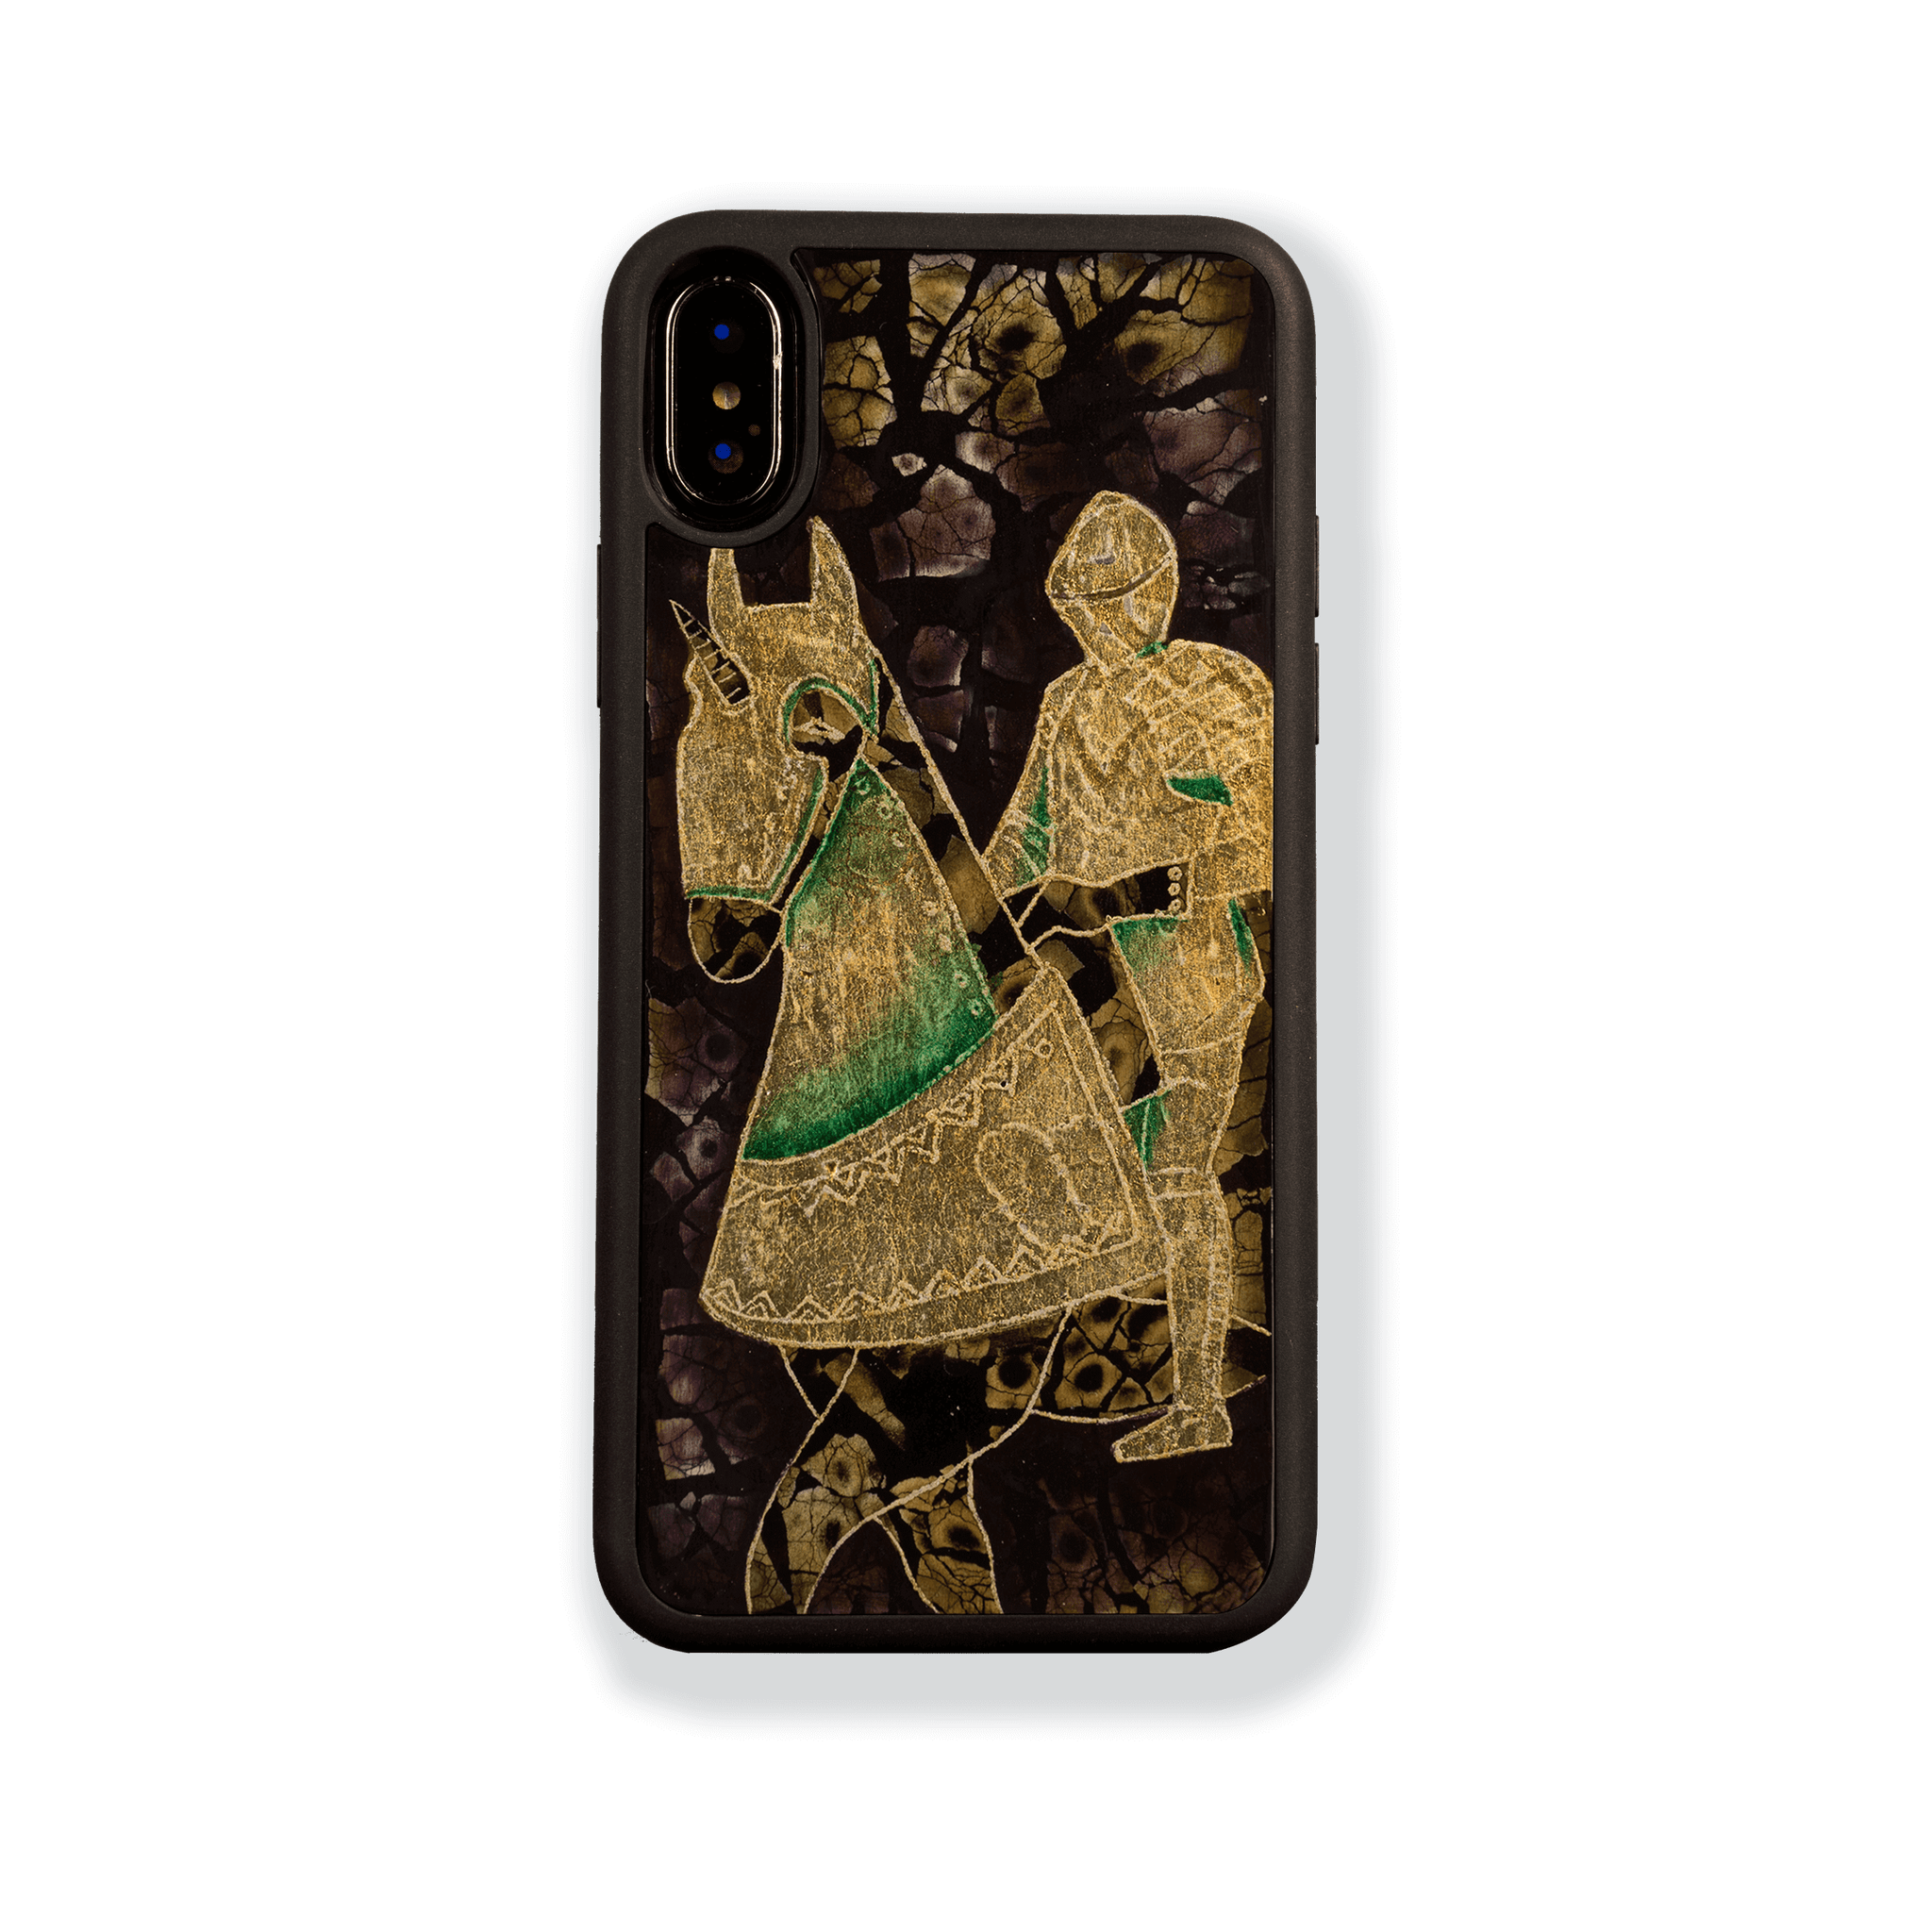 Hiệp Sỹ Trung Cổ, iPhone Xs Max